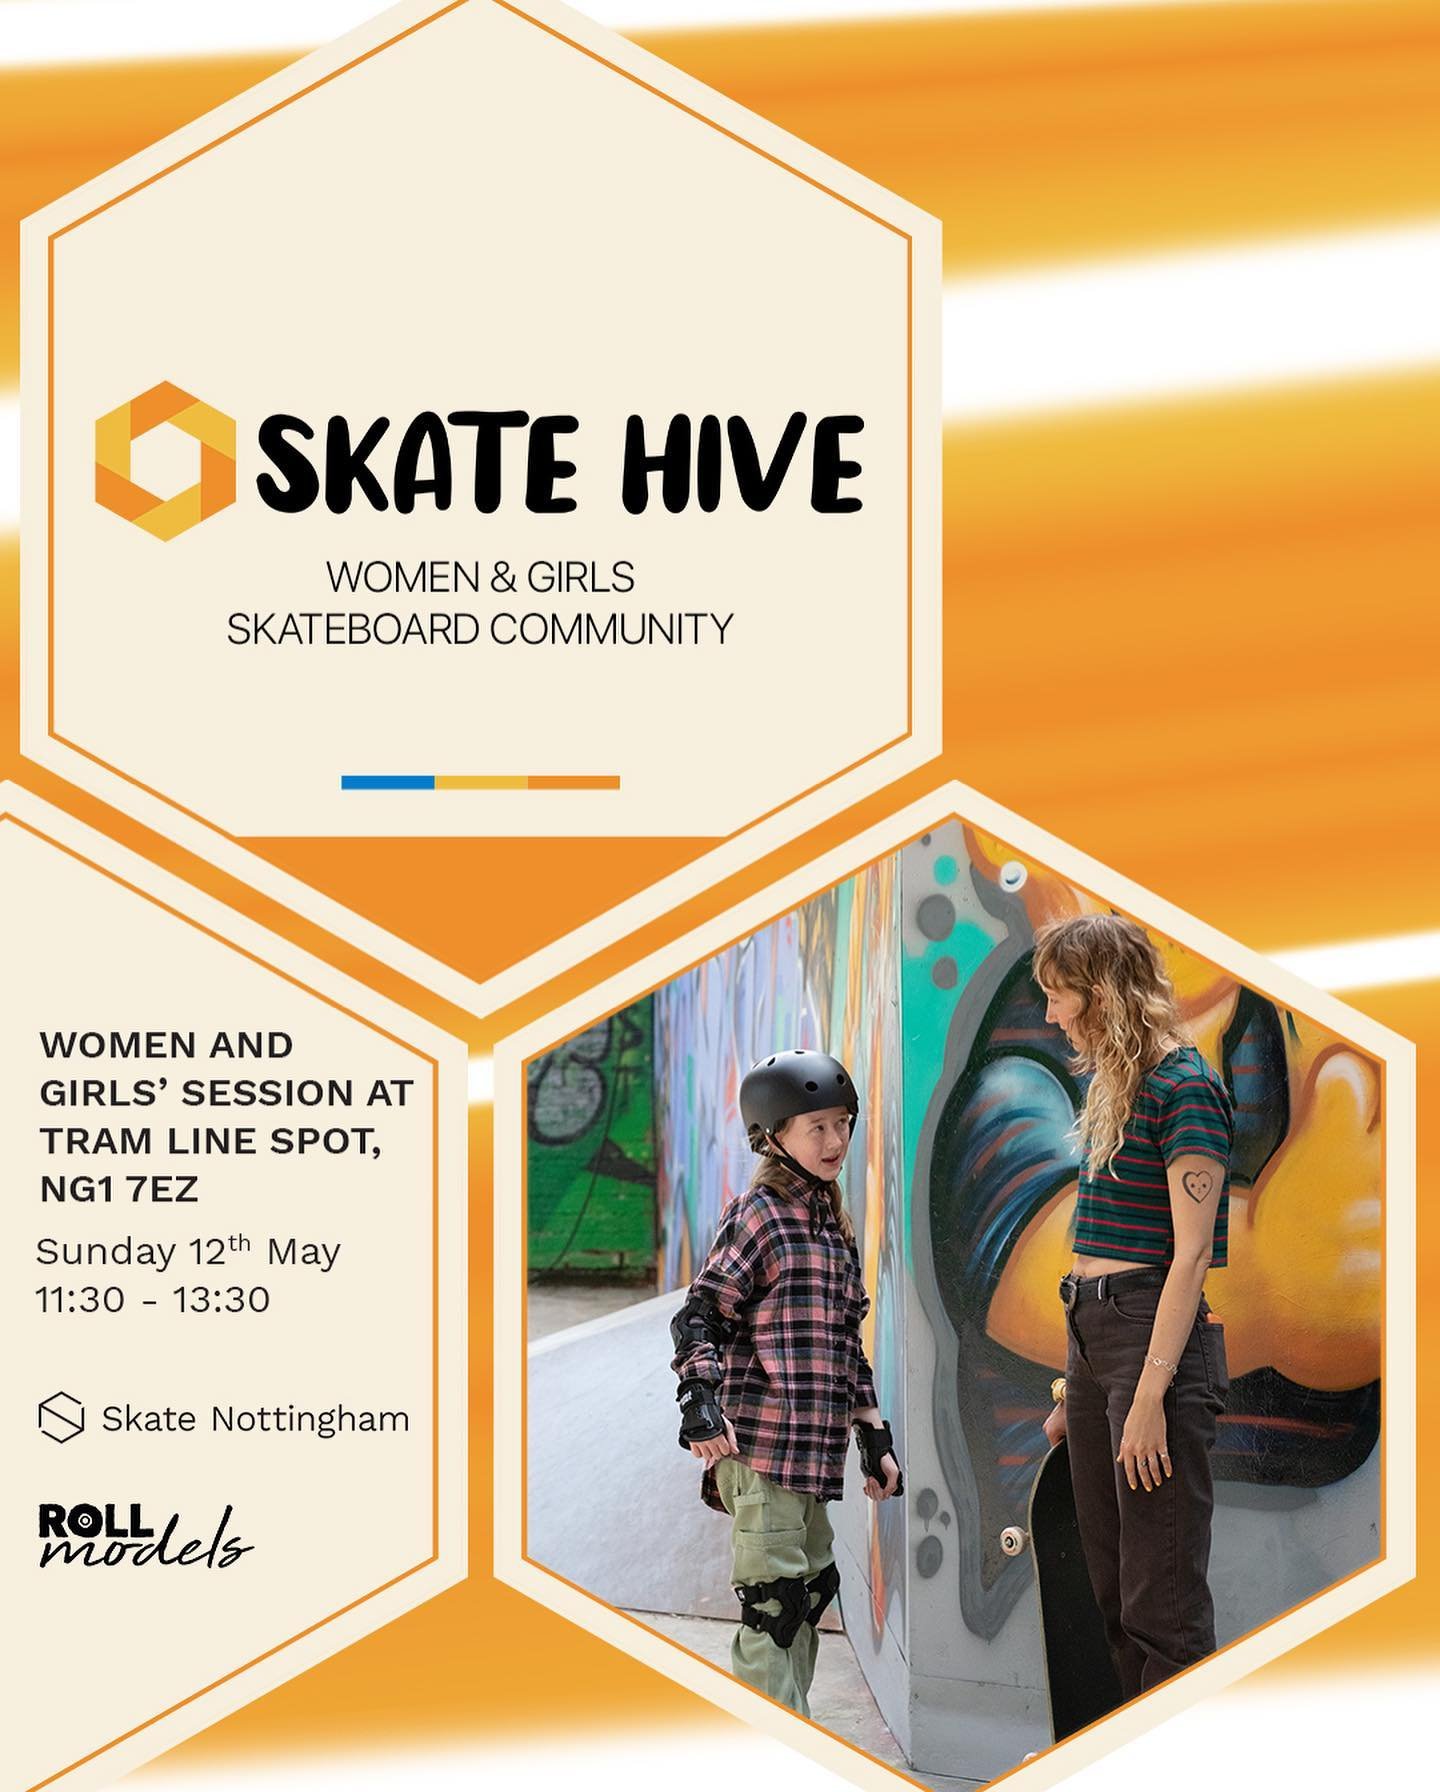 As well as our regular Saturday session, we have another Skate Hive women &amp; girls&rsquo; session this Sunday at @tramlinespot! ⁣
⁣
Join us from 11:30 - 13:30 for a supportive and inclusive skate, with coaches on hand if needed. Open to all ages 7